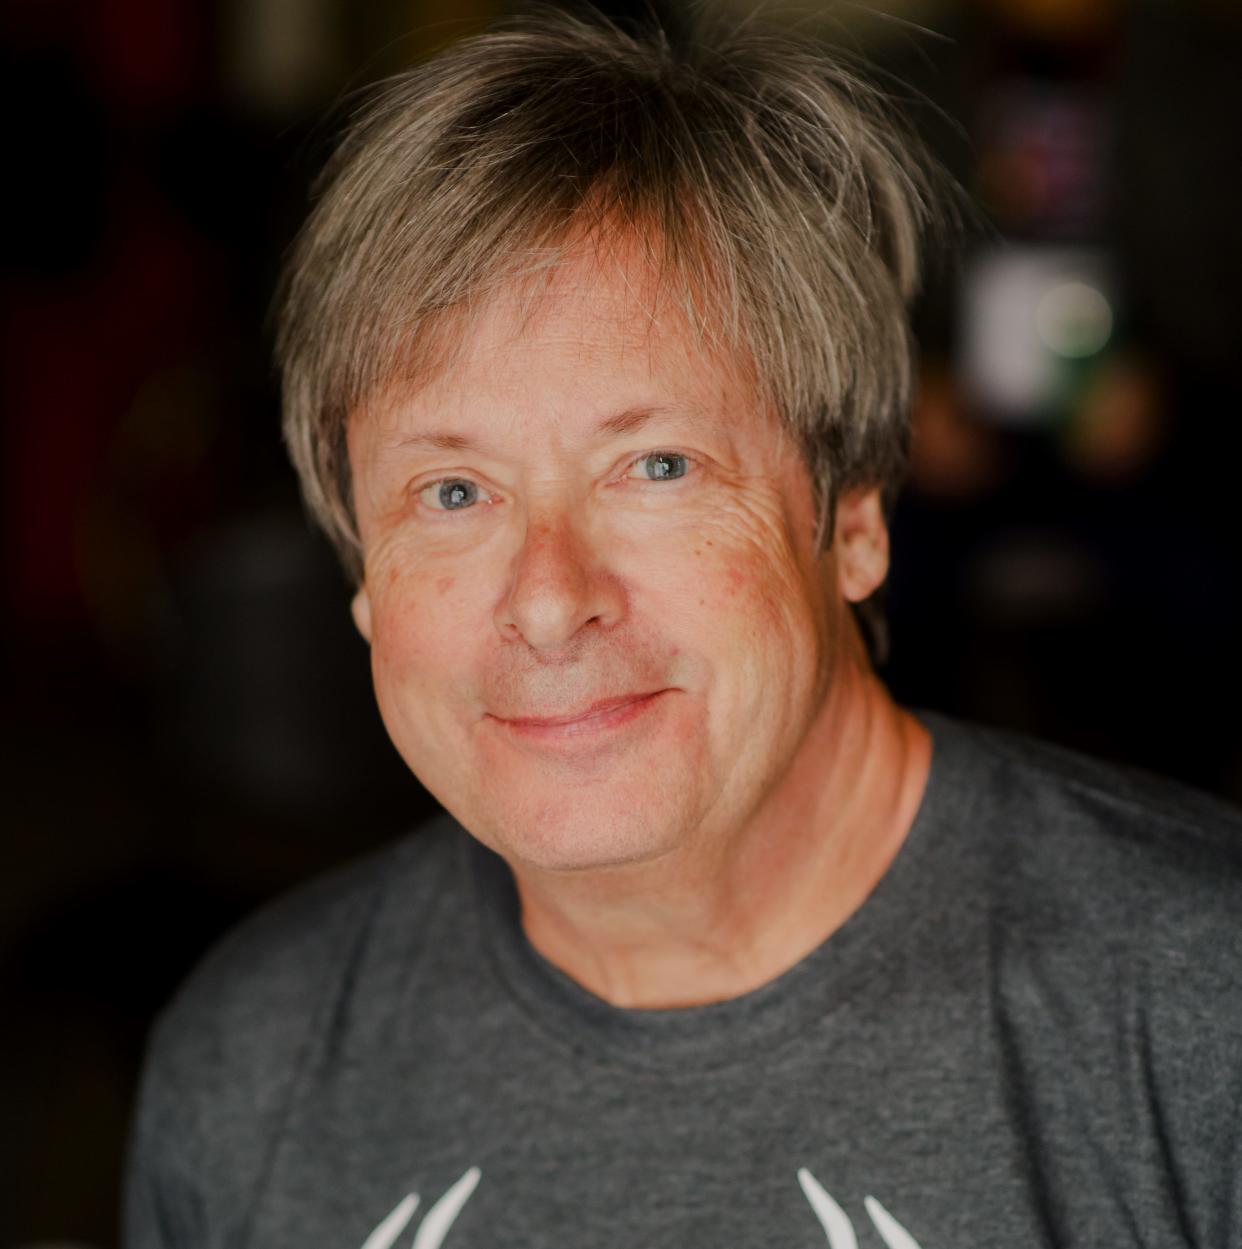 Pulitzer Prize-winning humor columnist and author Dave Barry will appear on May 9, 2023 at the Palm Springs Cultural Center in Palm Springs, Calif., as part of the Palm Springs Speaks lecture series.